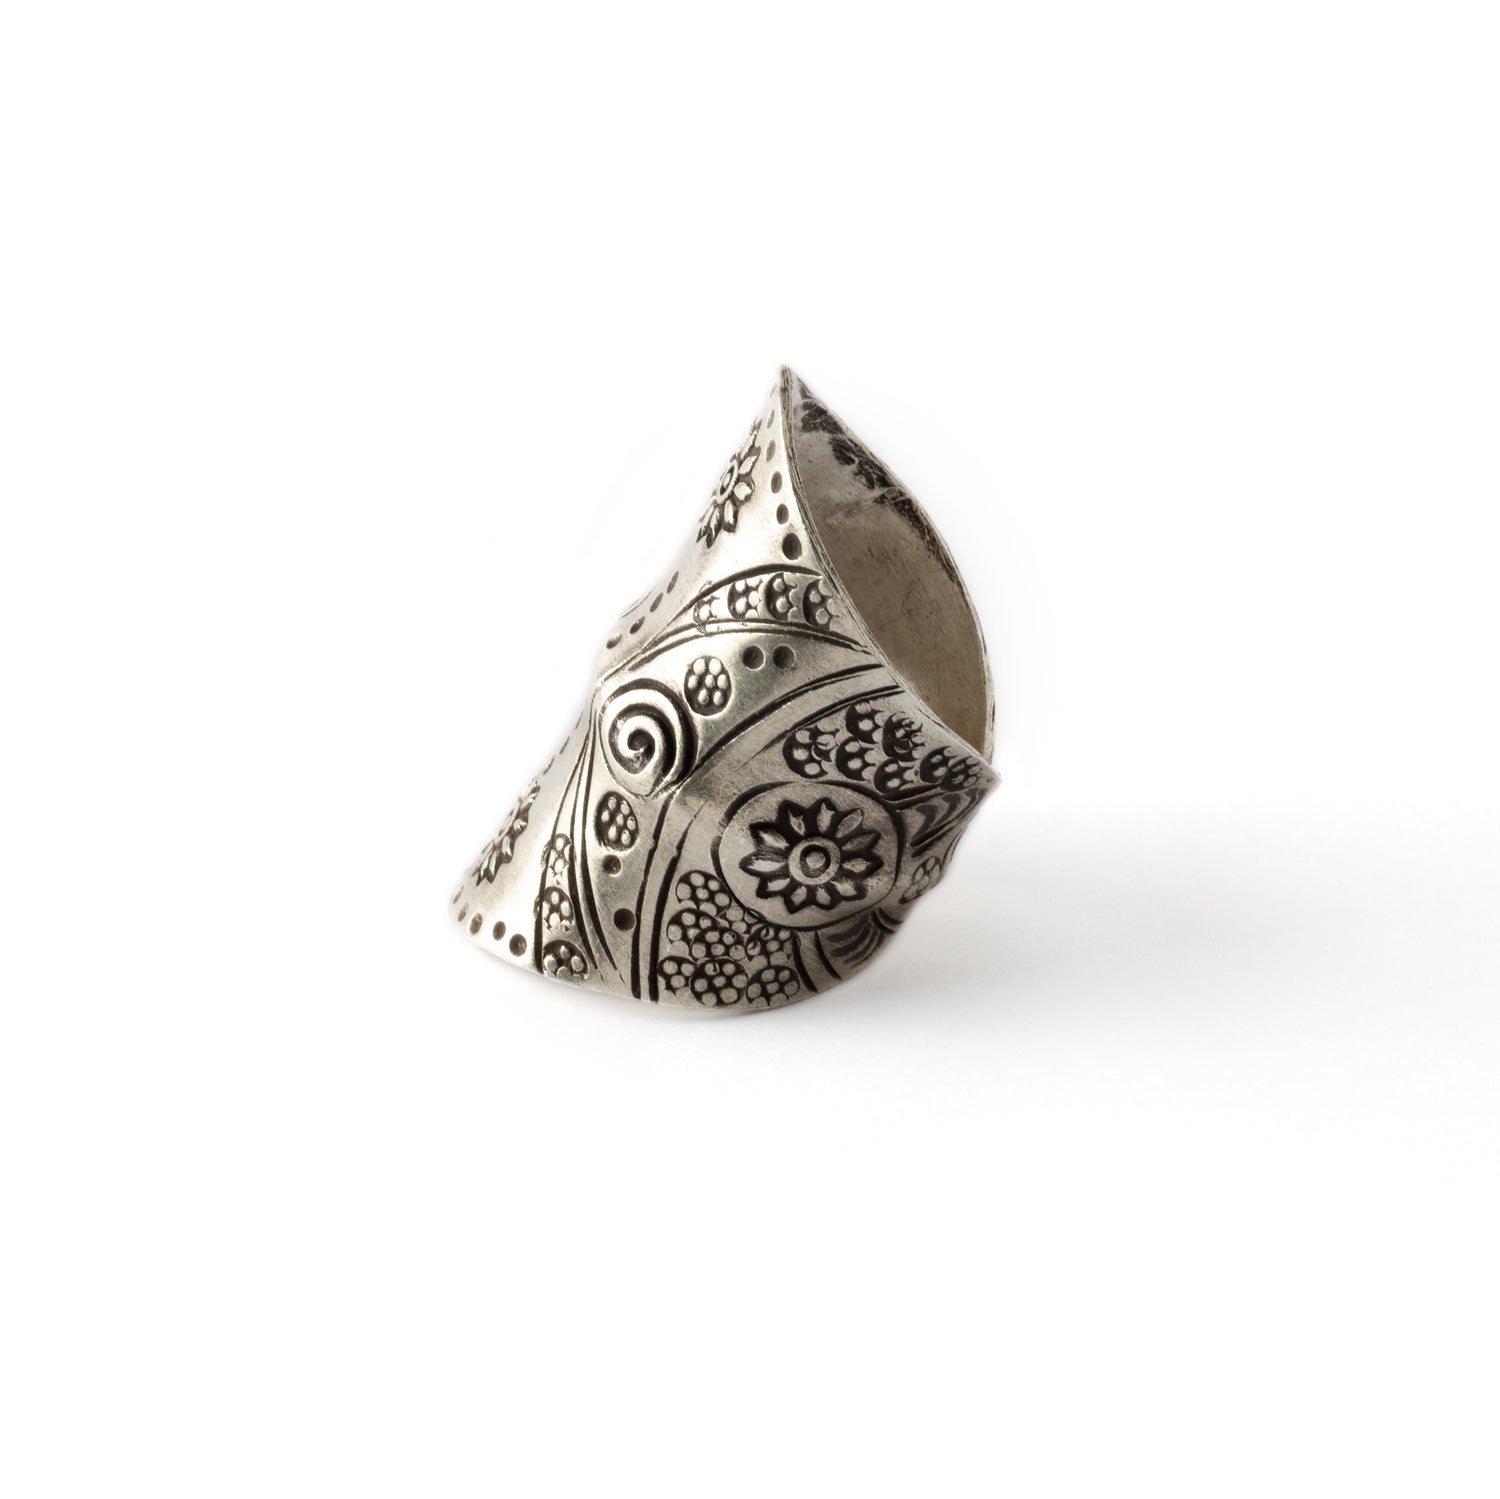 95% tribal silver long finger ring with etched tribal motifs dide view